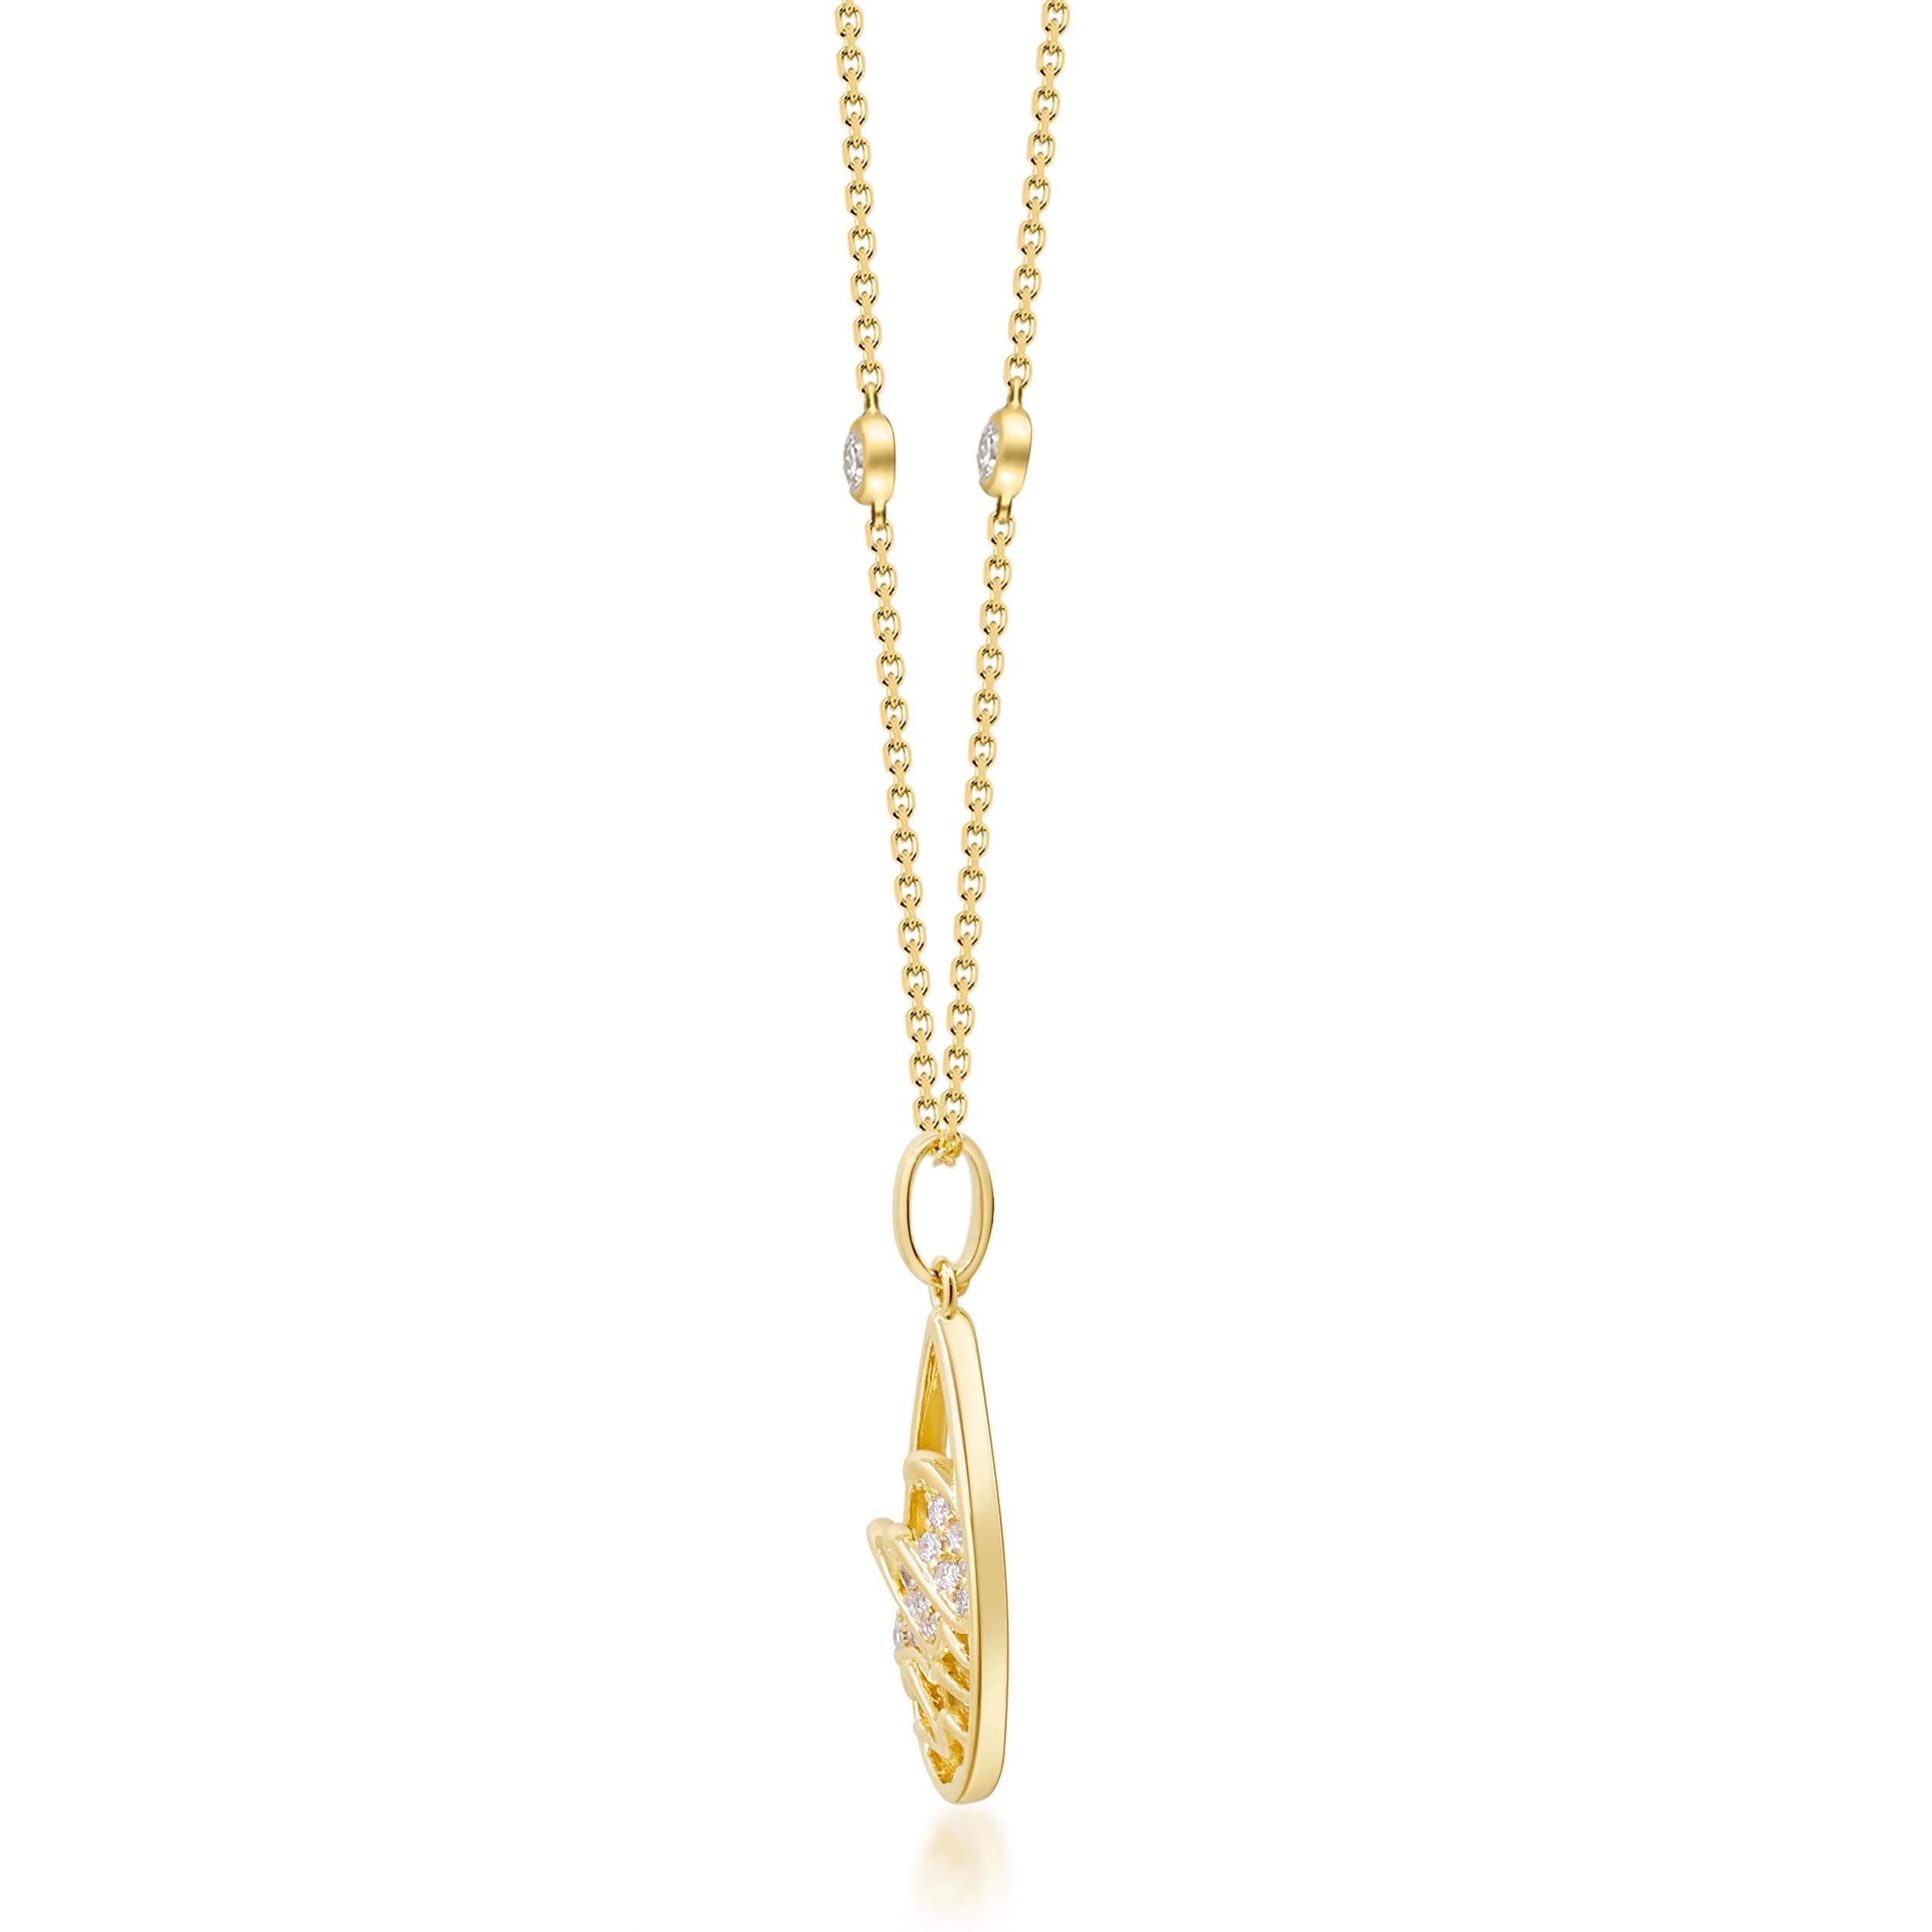 * Add our Seas the Day Pendant from Smithsonian collection designed by G&G as a shiny reminder to make the most of the present moment. This solid gold pear circle feature three layers of textured waves, perfect for any ocean-lover.
* The Smithsonian